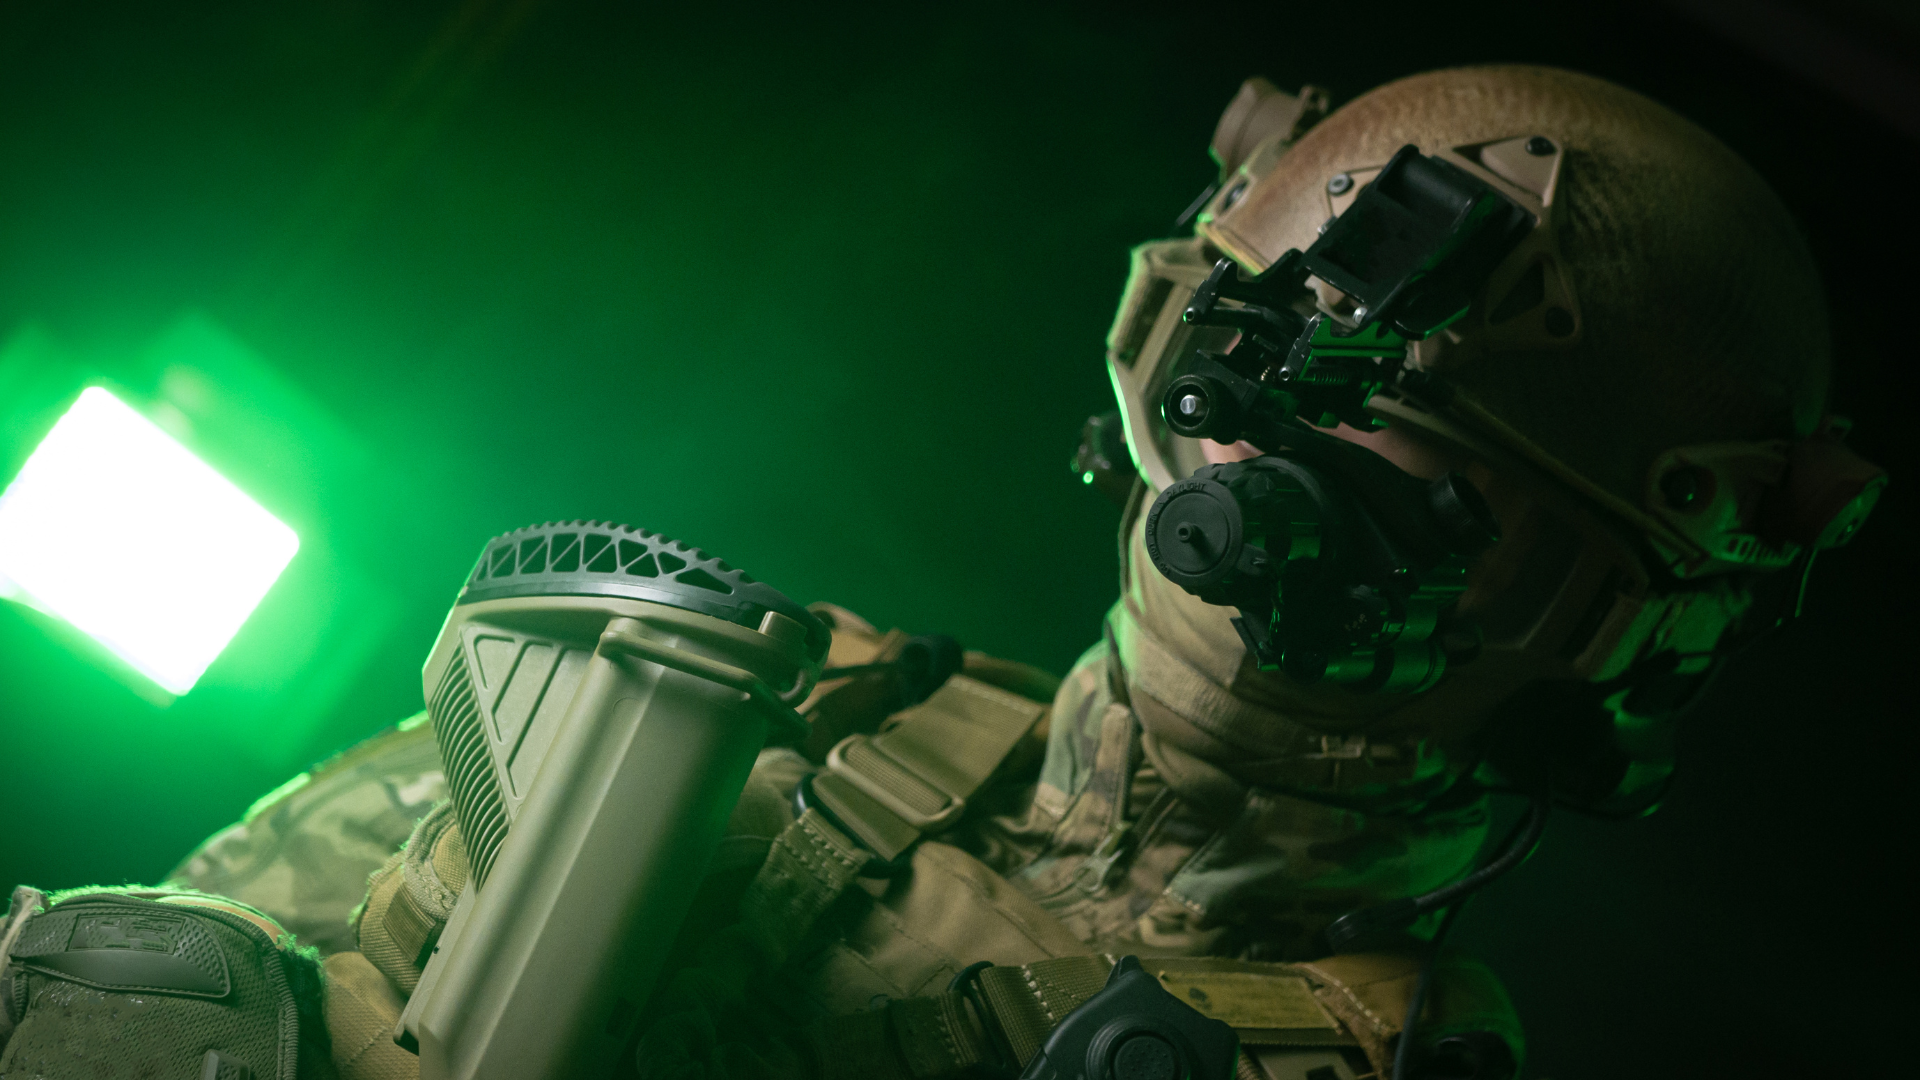 a soldier in military clothing with a night vision device and on a dark background